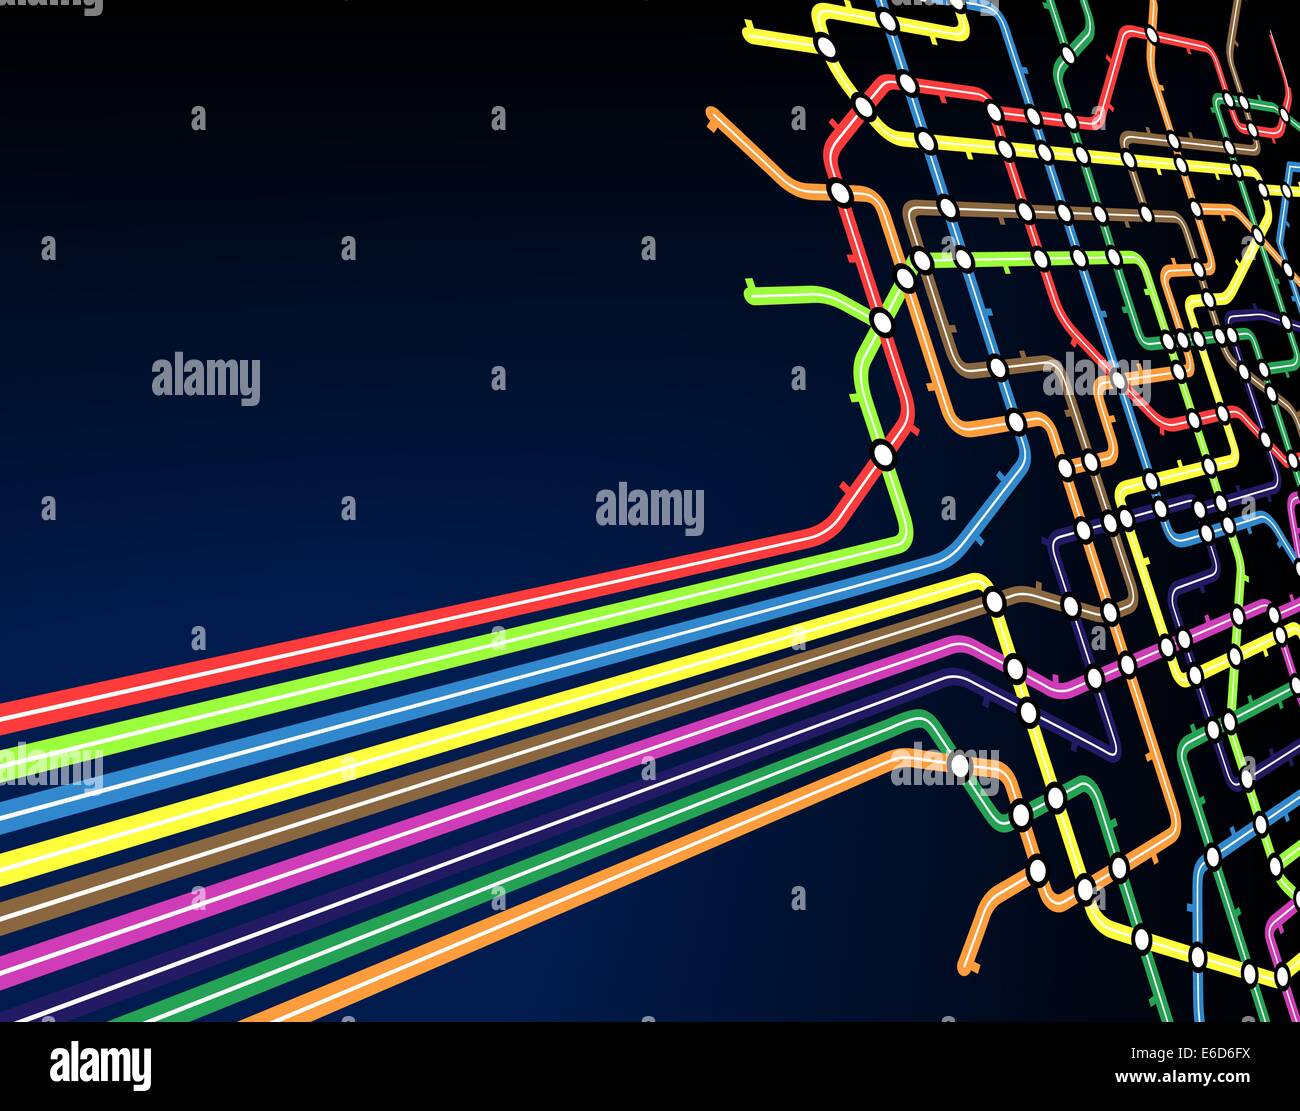 Abstract editable vector background of a subway map Stock Vector